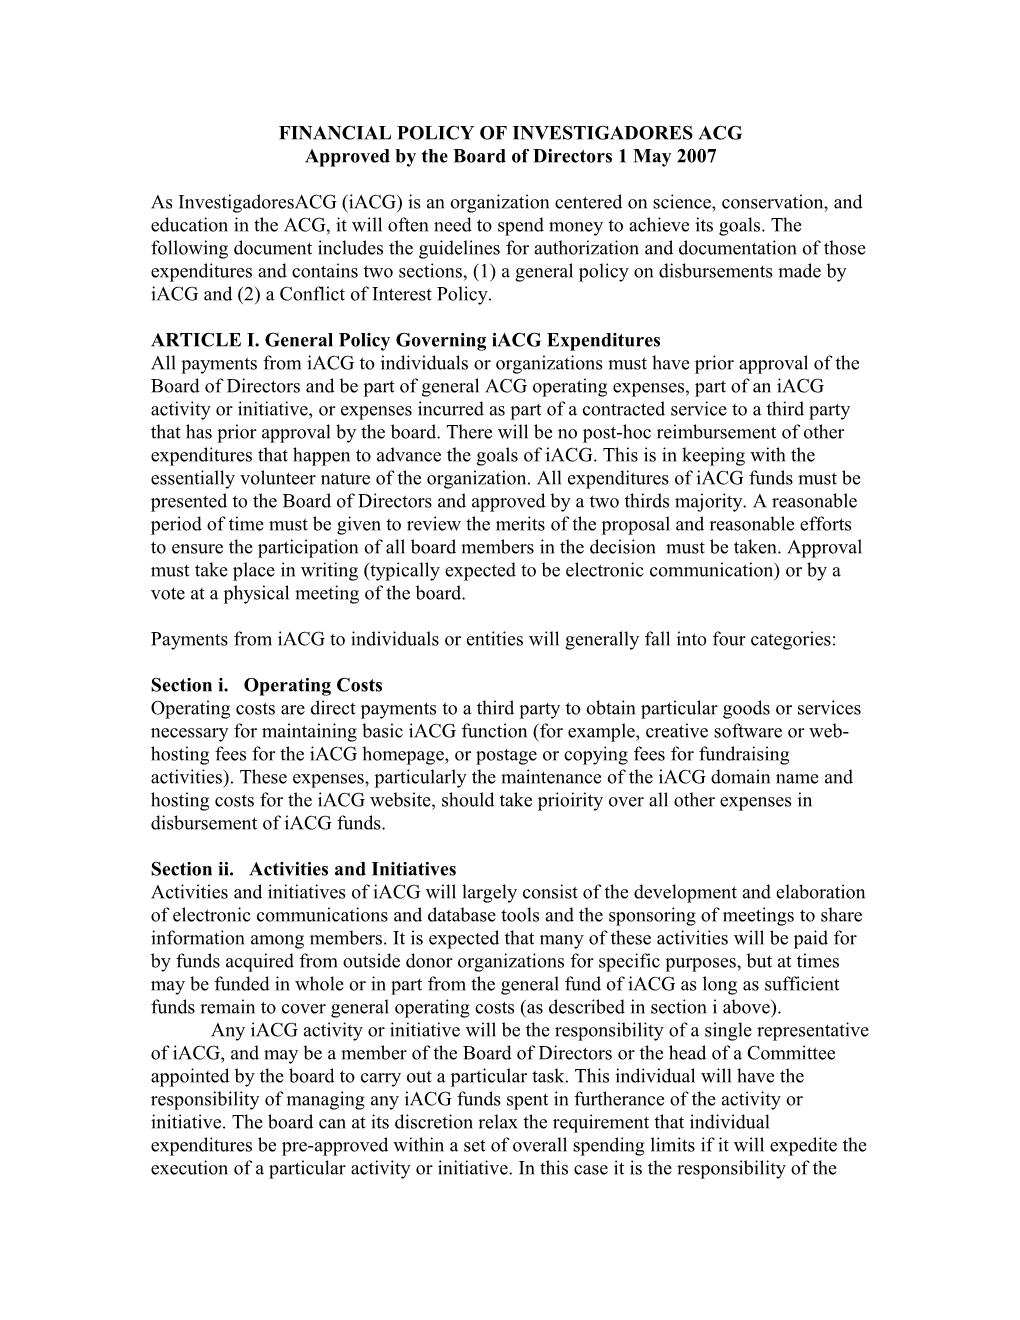 Iacg Conflict of Interest Policy: Draft Version 14 April 07